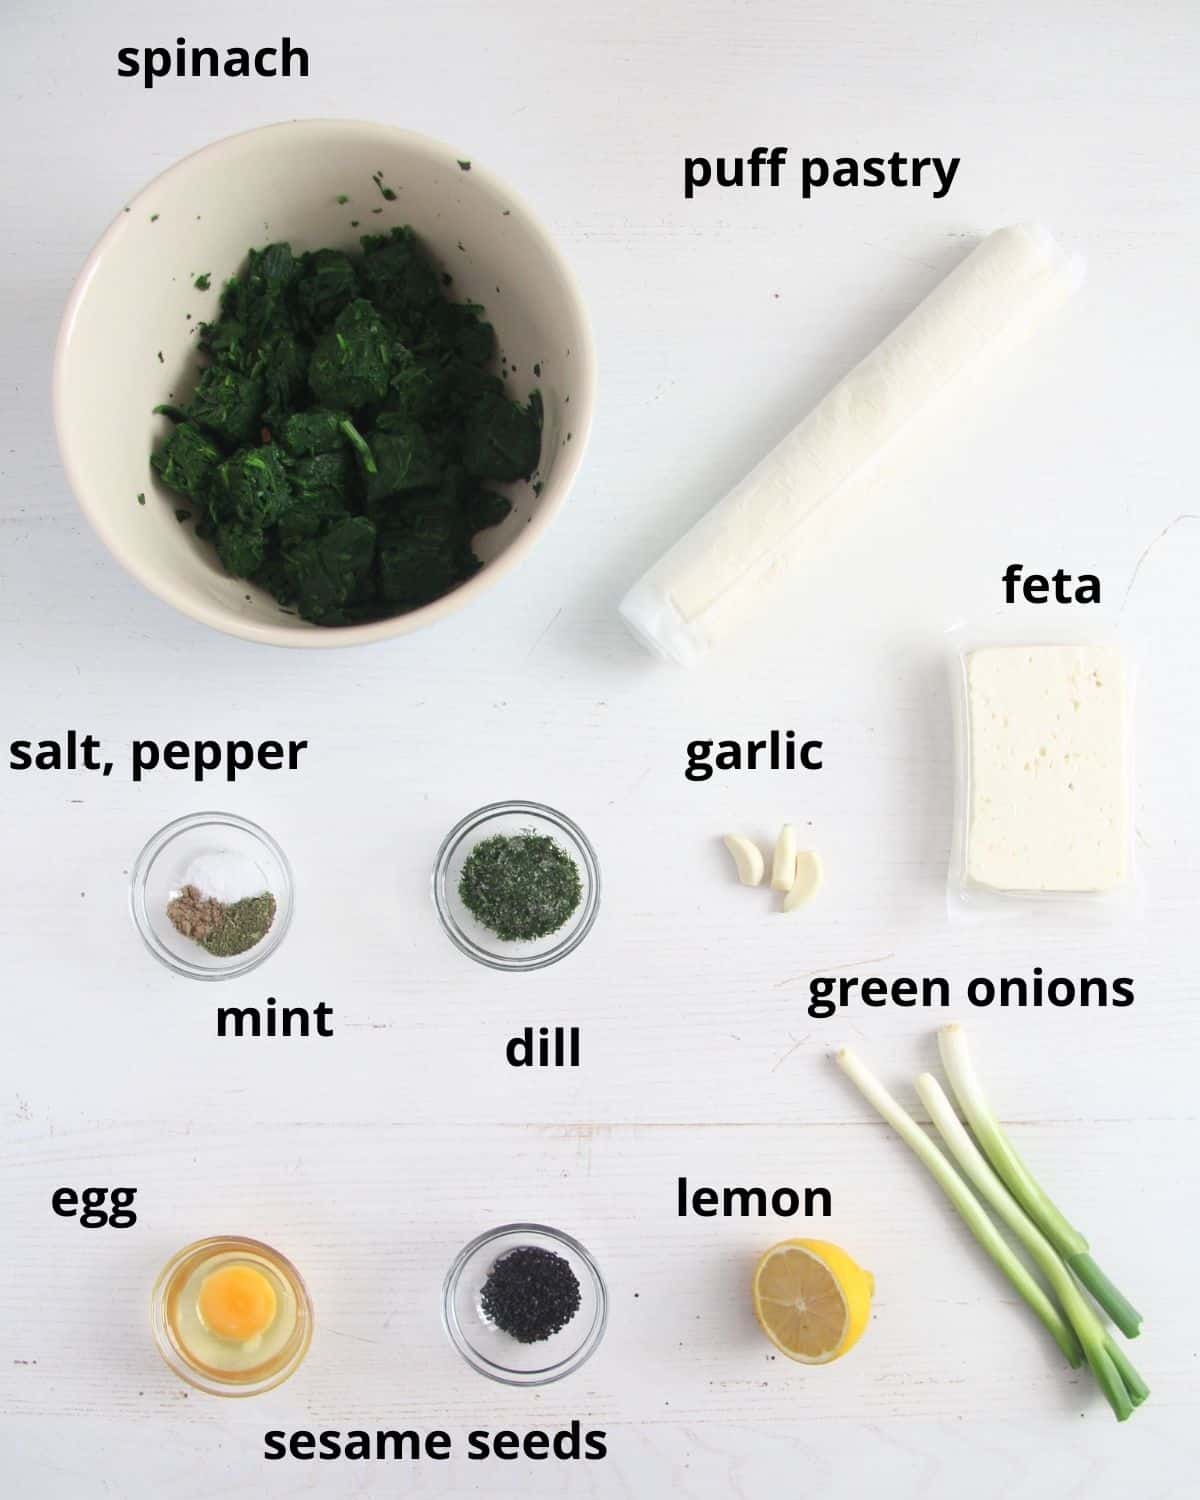 listed ingredients for making spanakopita on the table.